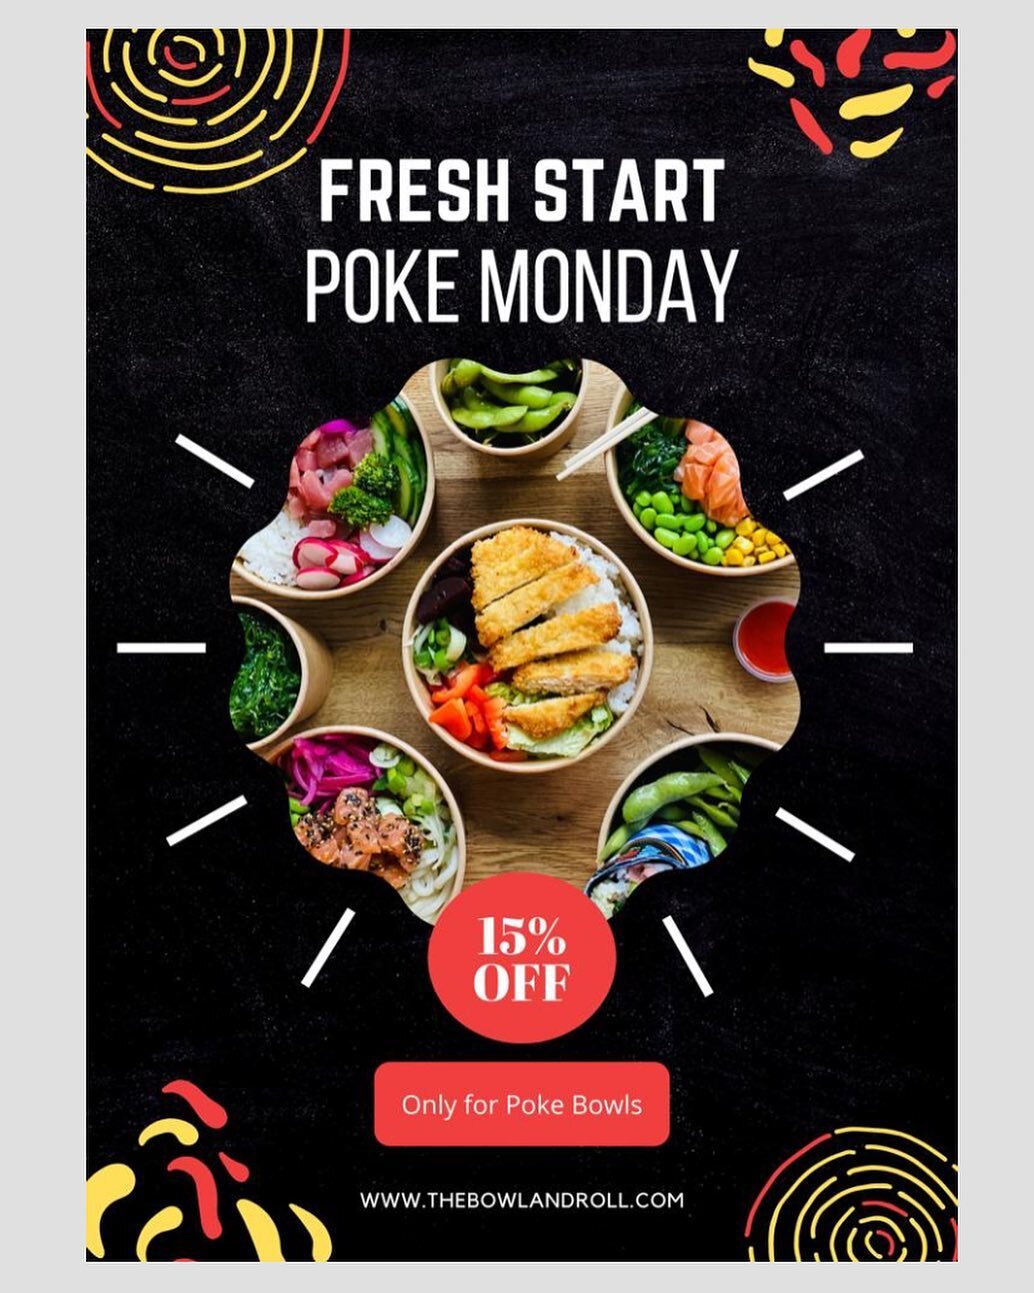 Did someone say Poke Monday?? Yesss🥳🥳
We have %15 OFF for poke bowls. Discount only available for MONDAYS, pop in @thebowlandroll and get your Poke bowl🍣🥢 🥙🍚